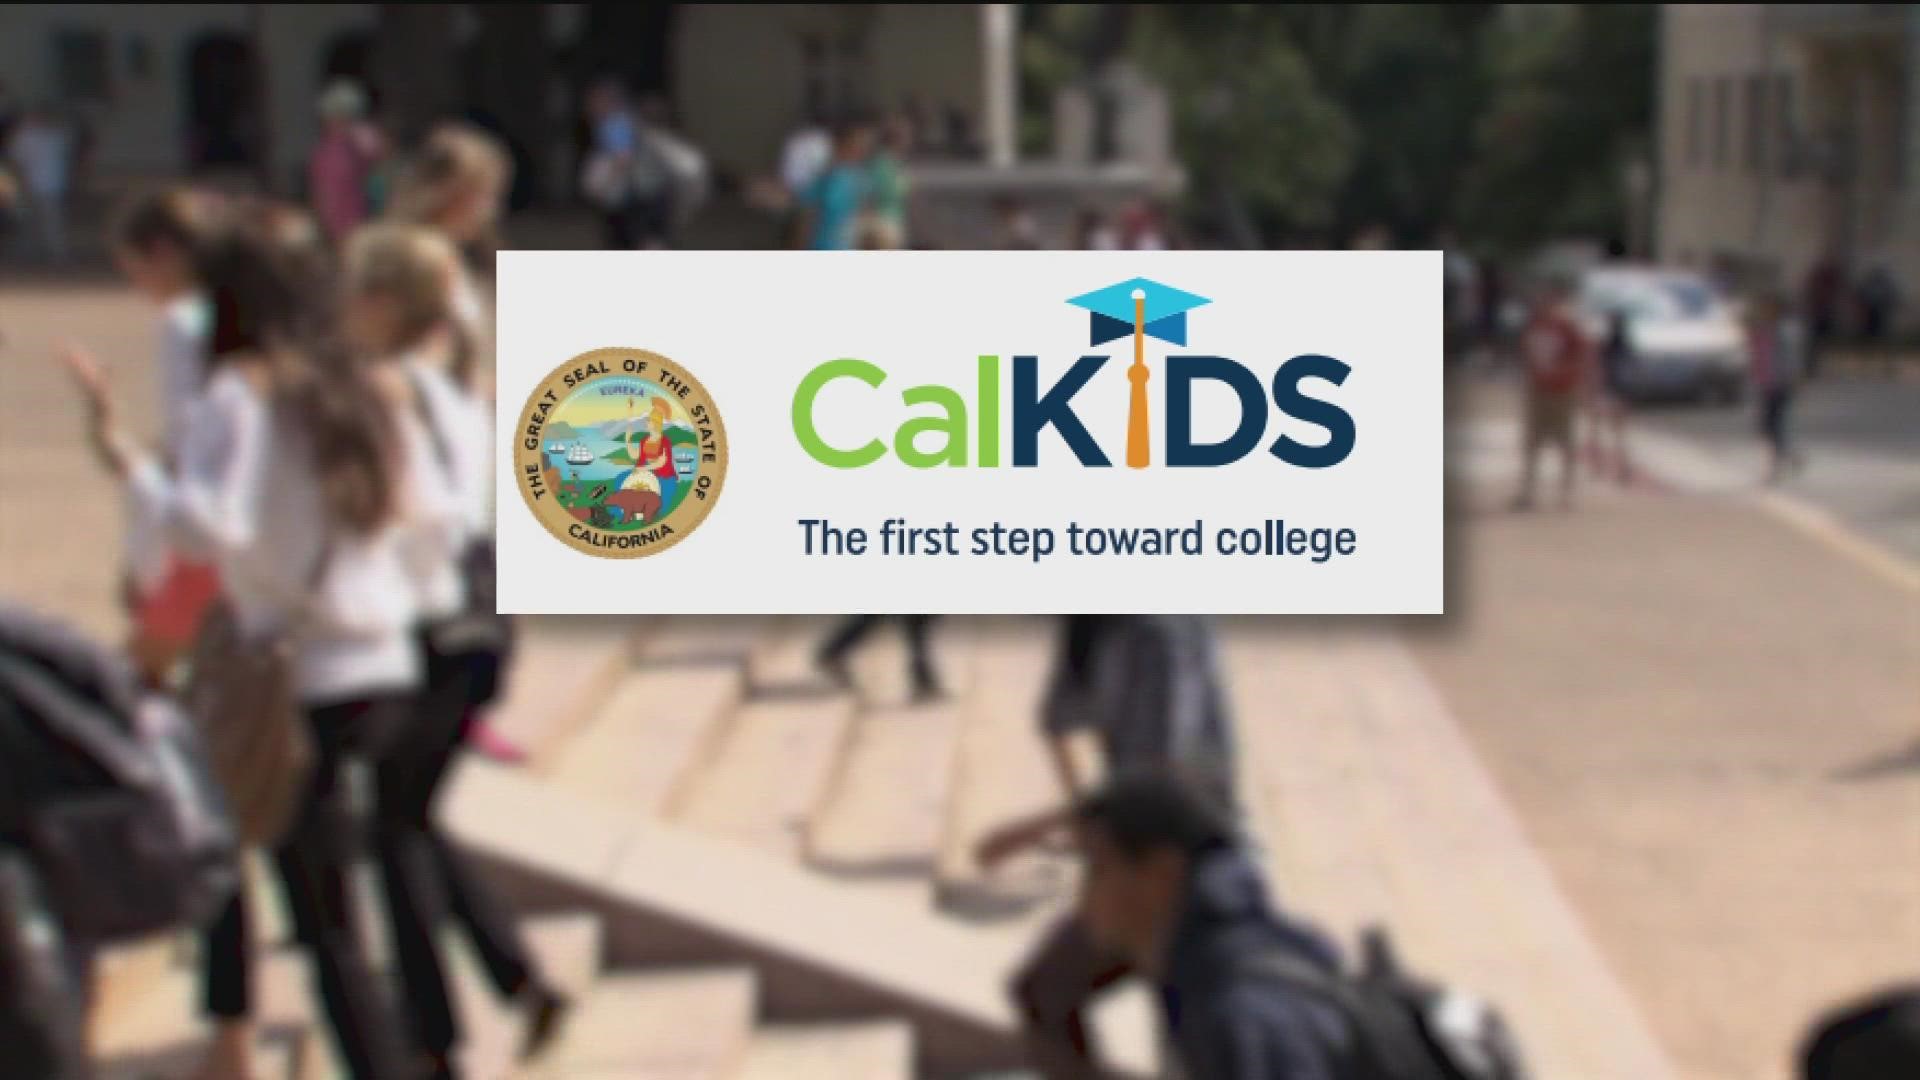 Newborns can receive up to $100 in their CalKIDS account and low-income school age children can receive up to $1,500.